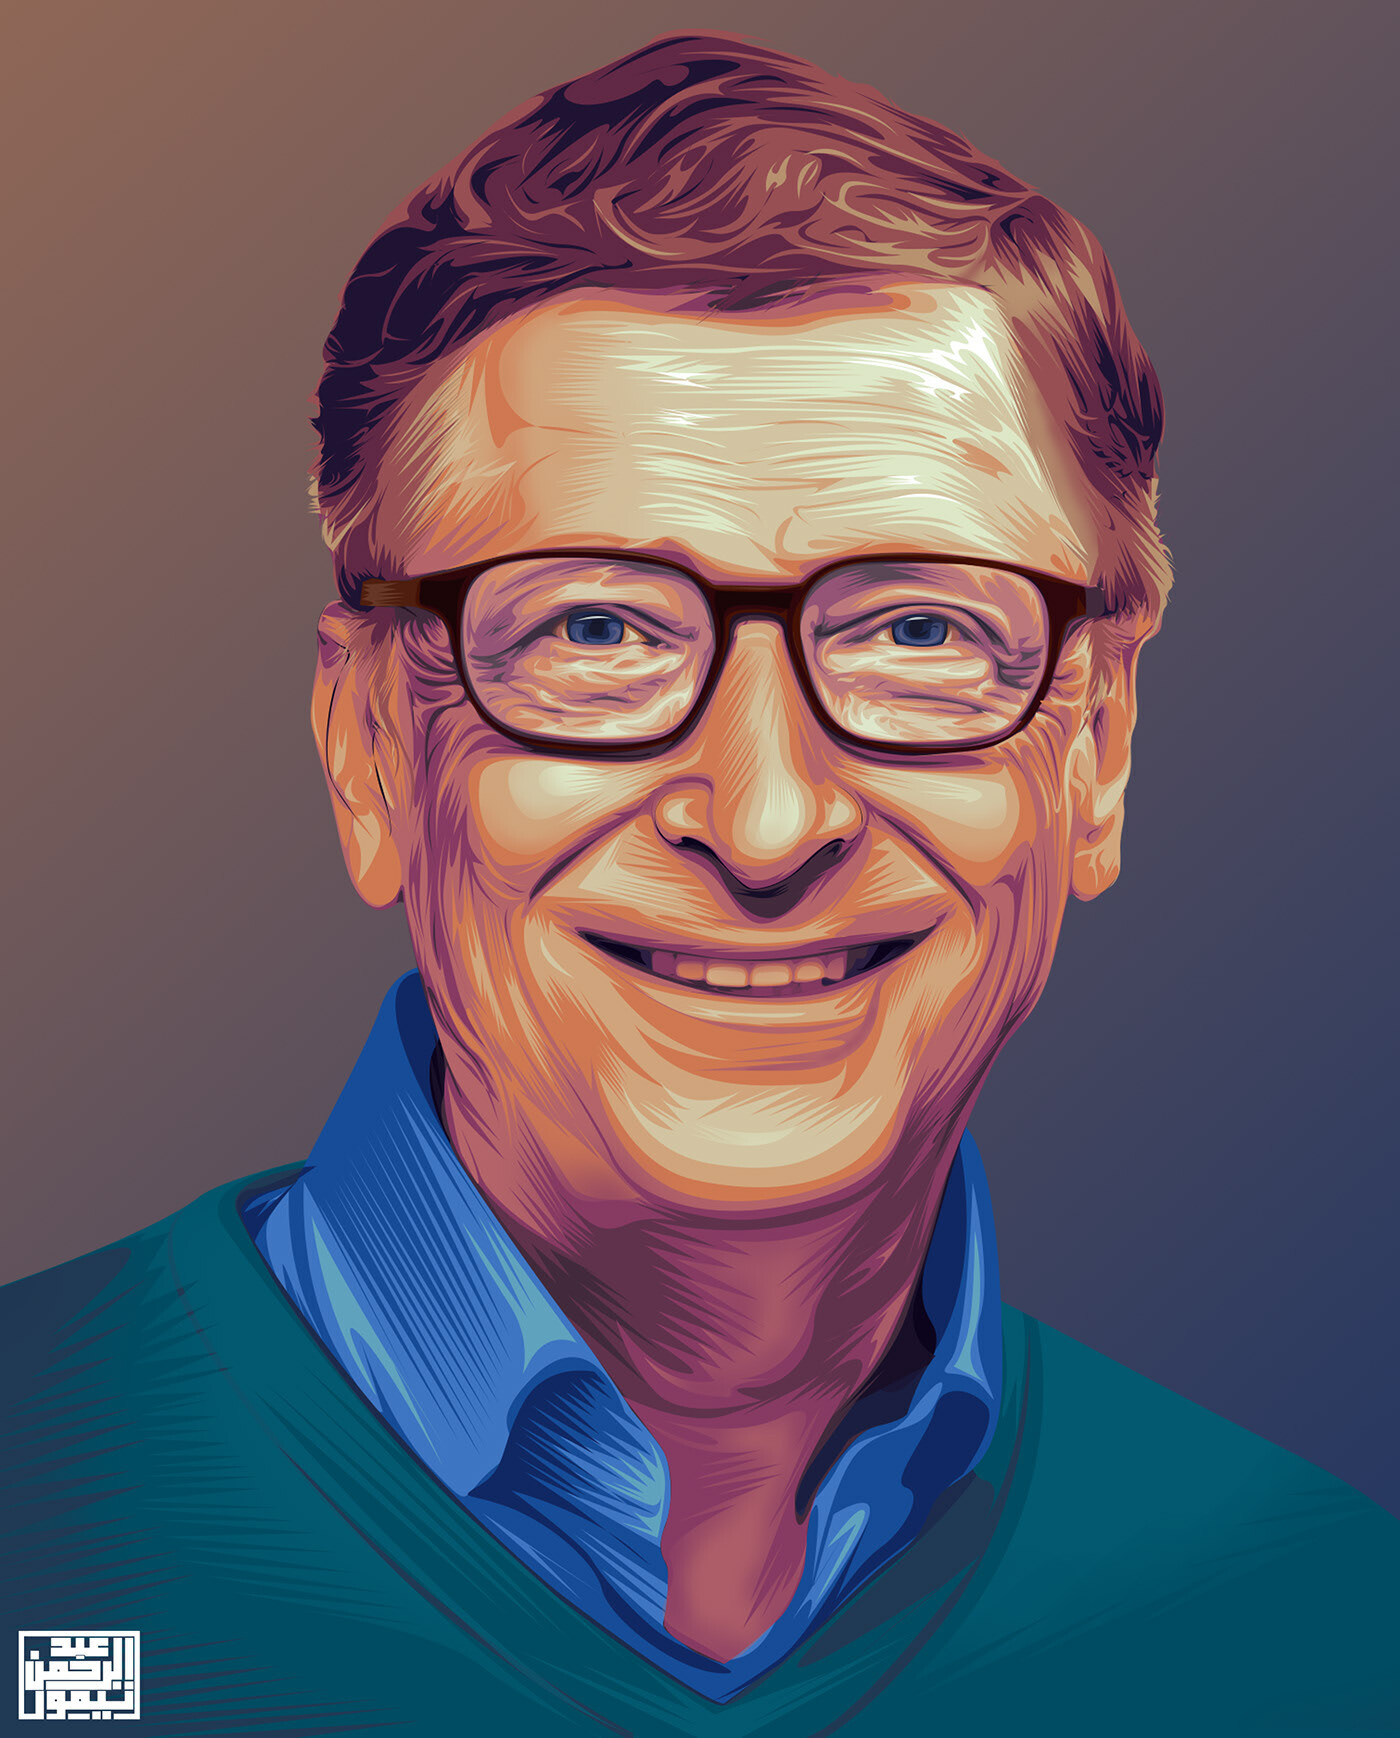 A Quick Free Art Lesson on How to Draw a Quick Caricature Bill Gates   YouTube